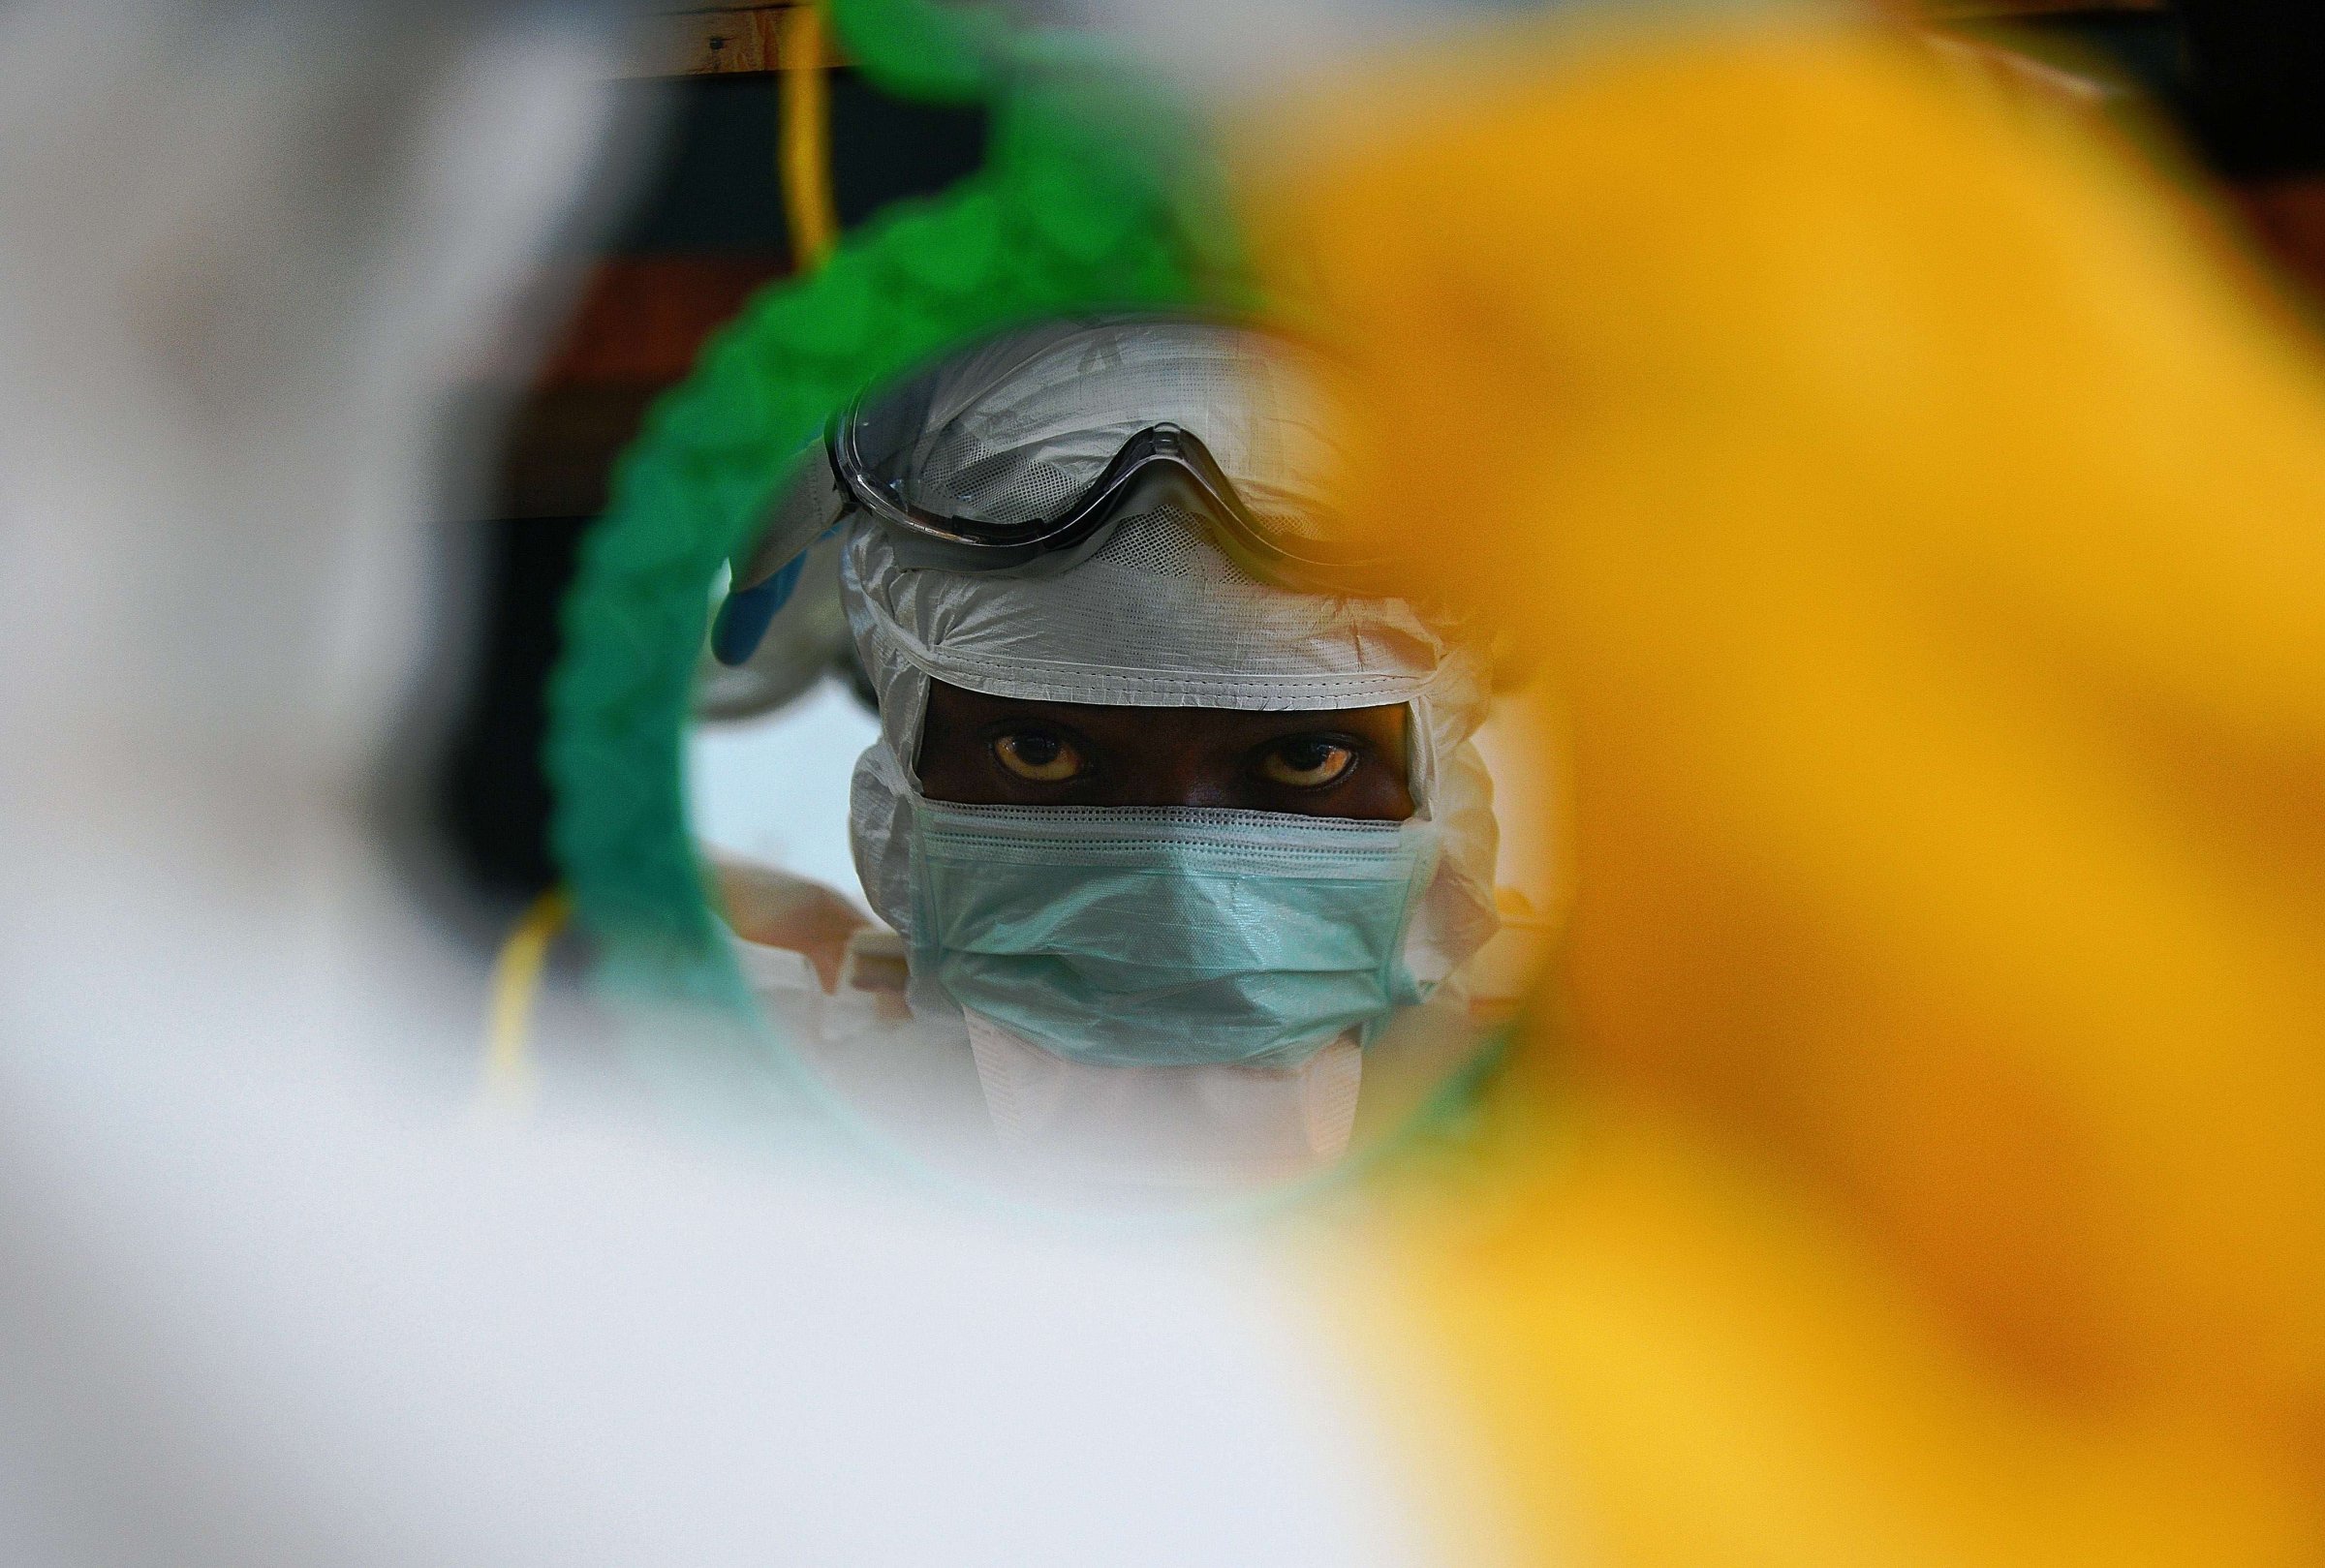 An MSF medical worker checks their protective clothing in a mirror at an MSF facility in Kailahun, Sierra Leone on August 15, 2014.